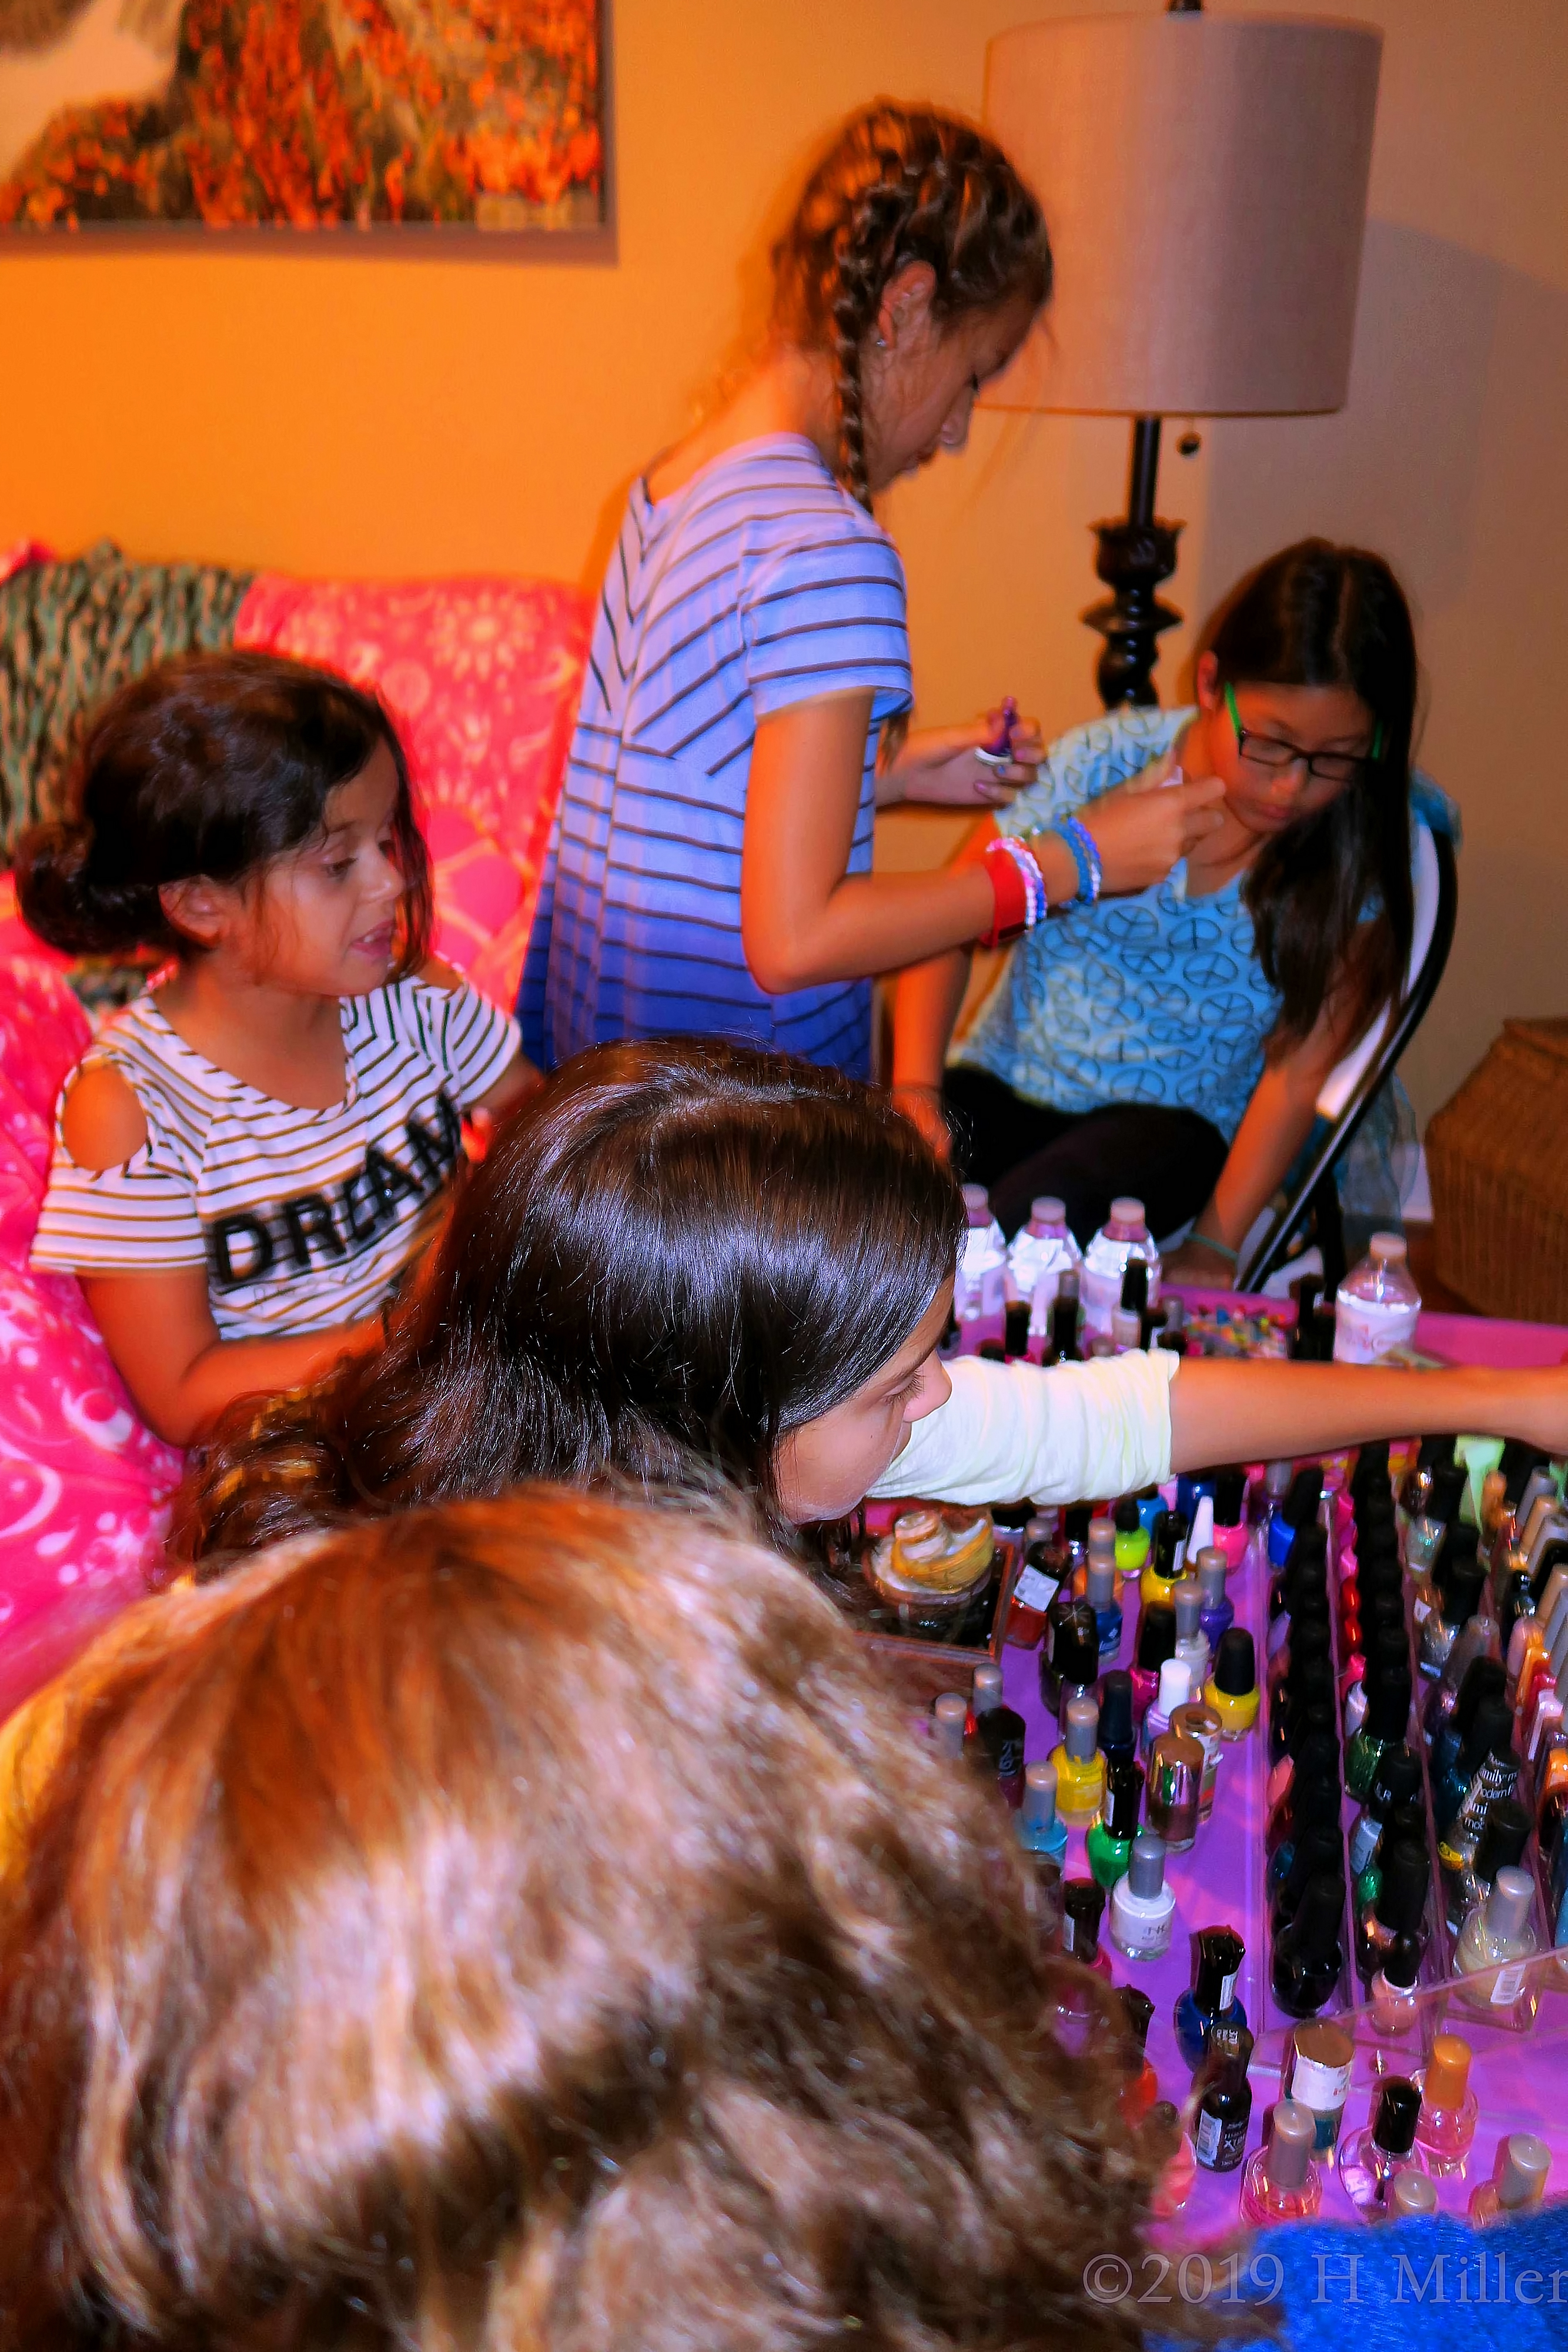 Party Guests Having Fun Choosing Their Color Polishes From The Nail Art Station 